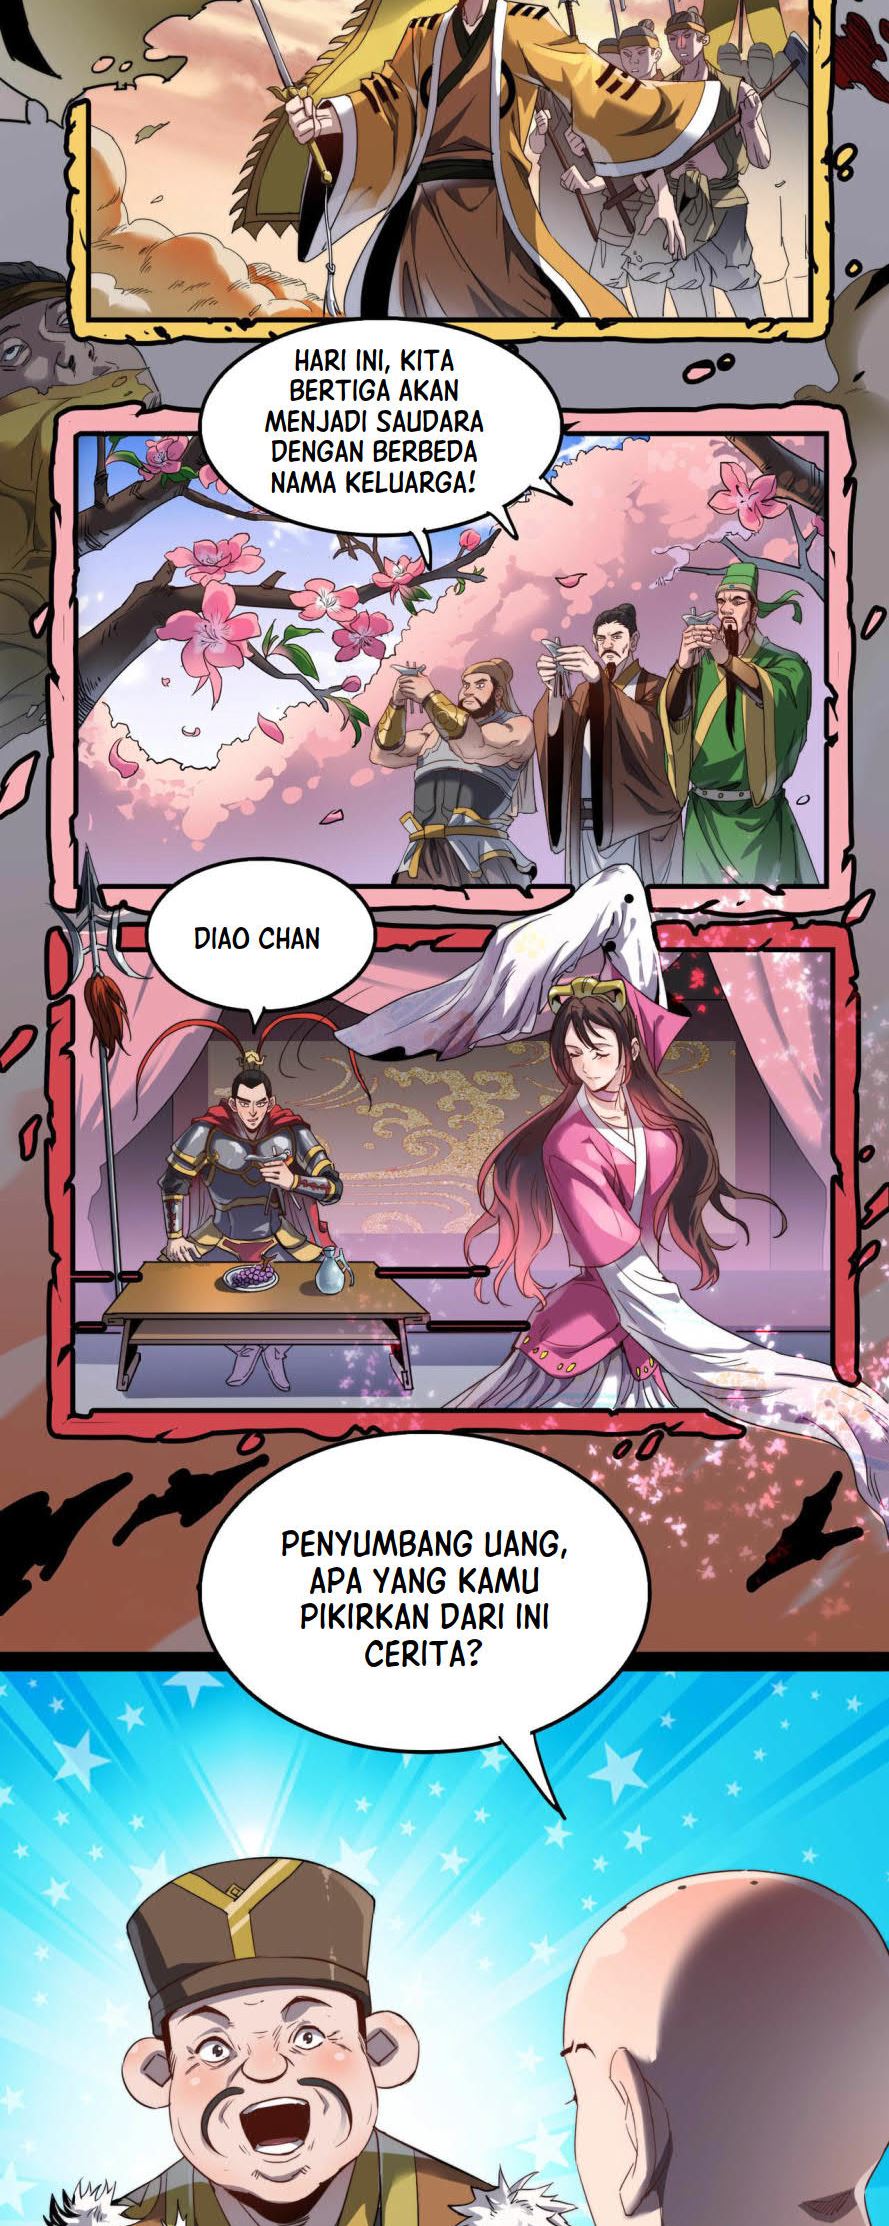 Dilarang COPAS - situs resmi www.mangacanblog.com - Komik building the strongest shaolin temple in another world 007 - chapter 7 8 Indonesia building the strongest shaolin temple in another world 007 - chapter 7 Terbaru 14|Baca Manga Komik Indonesia|Mangacan